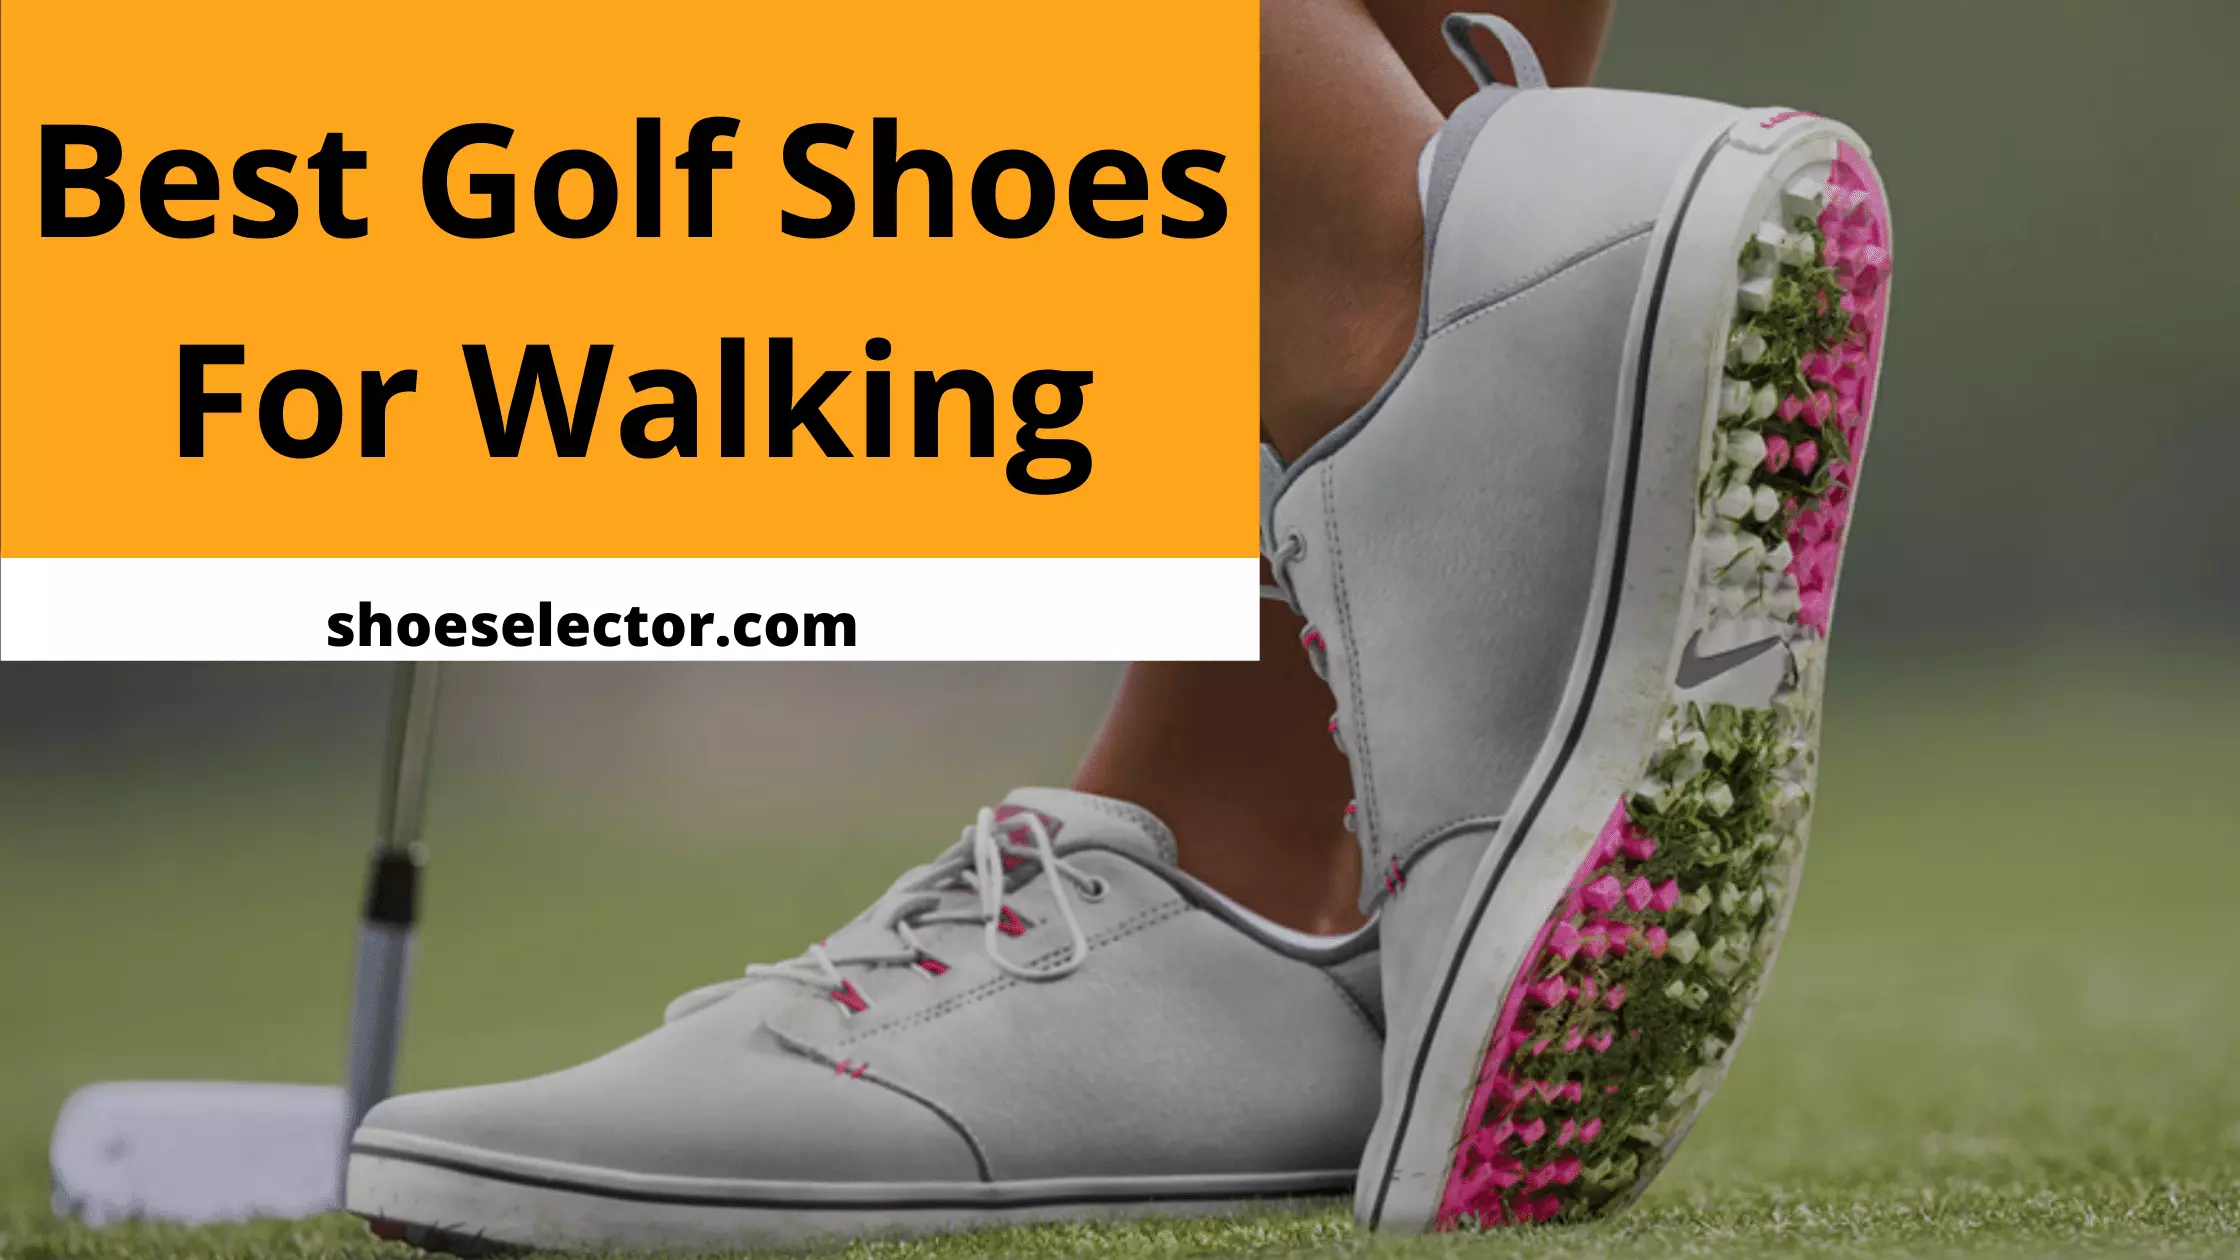 Best Golf Shoes For Walking - Updated Guide And Reviews